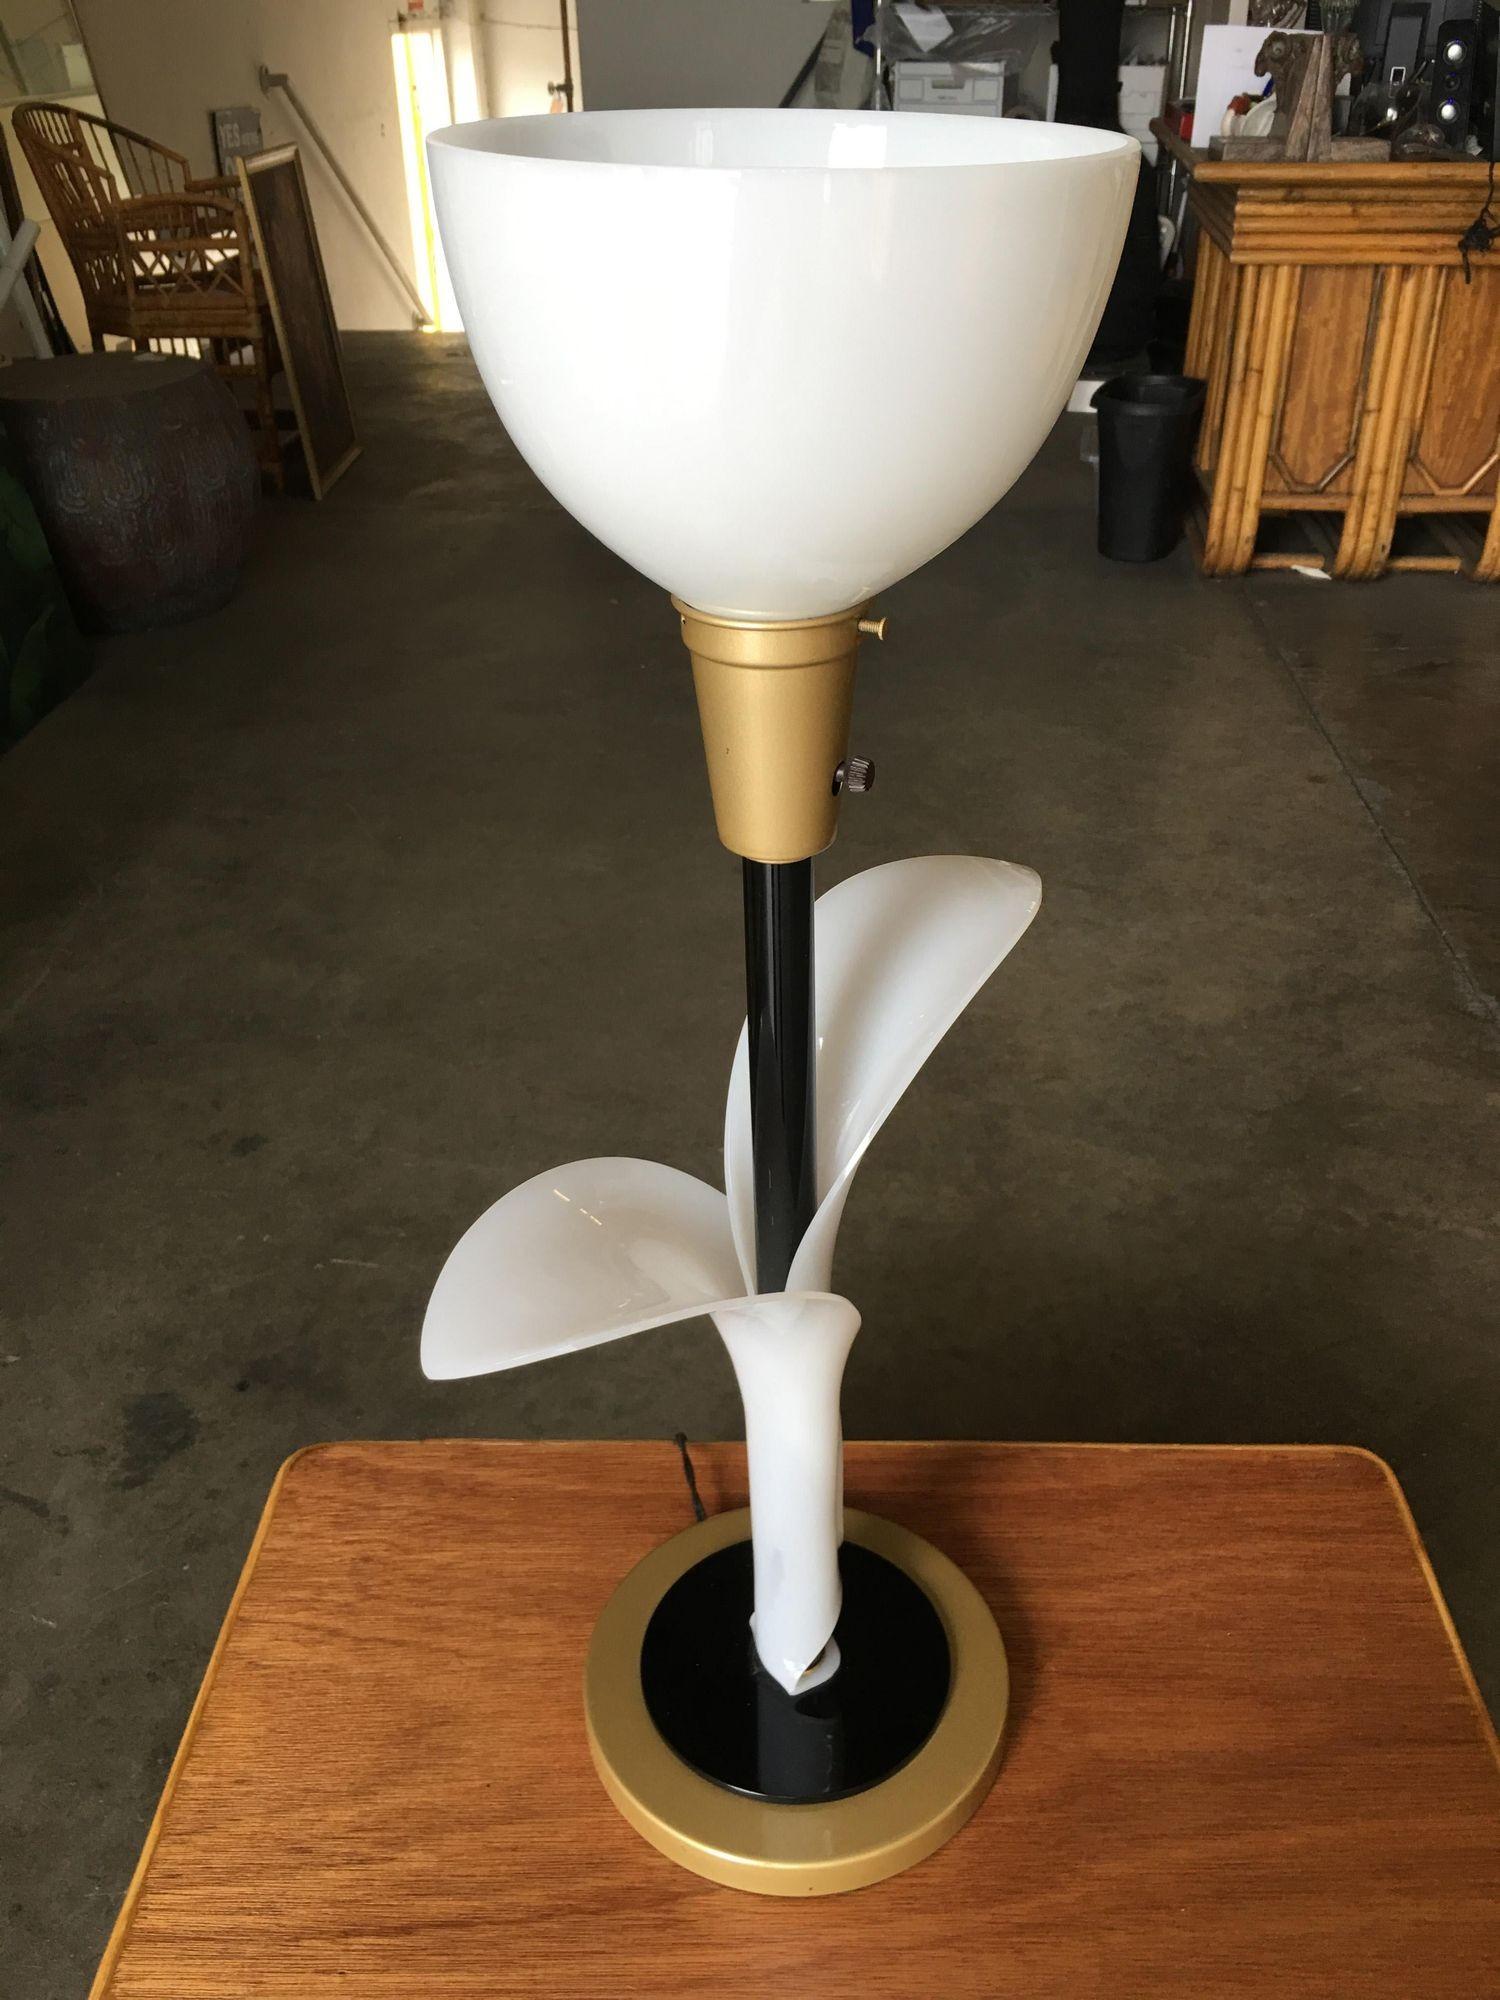 These exceptional pair of 1960s tulip table lamps crafted by Rembrandt Lamp boast leaf-shaped shafts delicately fashioned from ivory-toned acrylic. The acrylic gracefully encases the brass base and a sleek black-painted spine. 

Completing the lamps